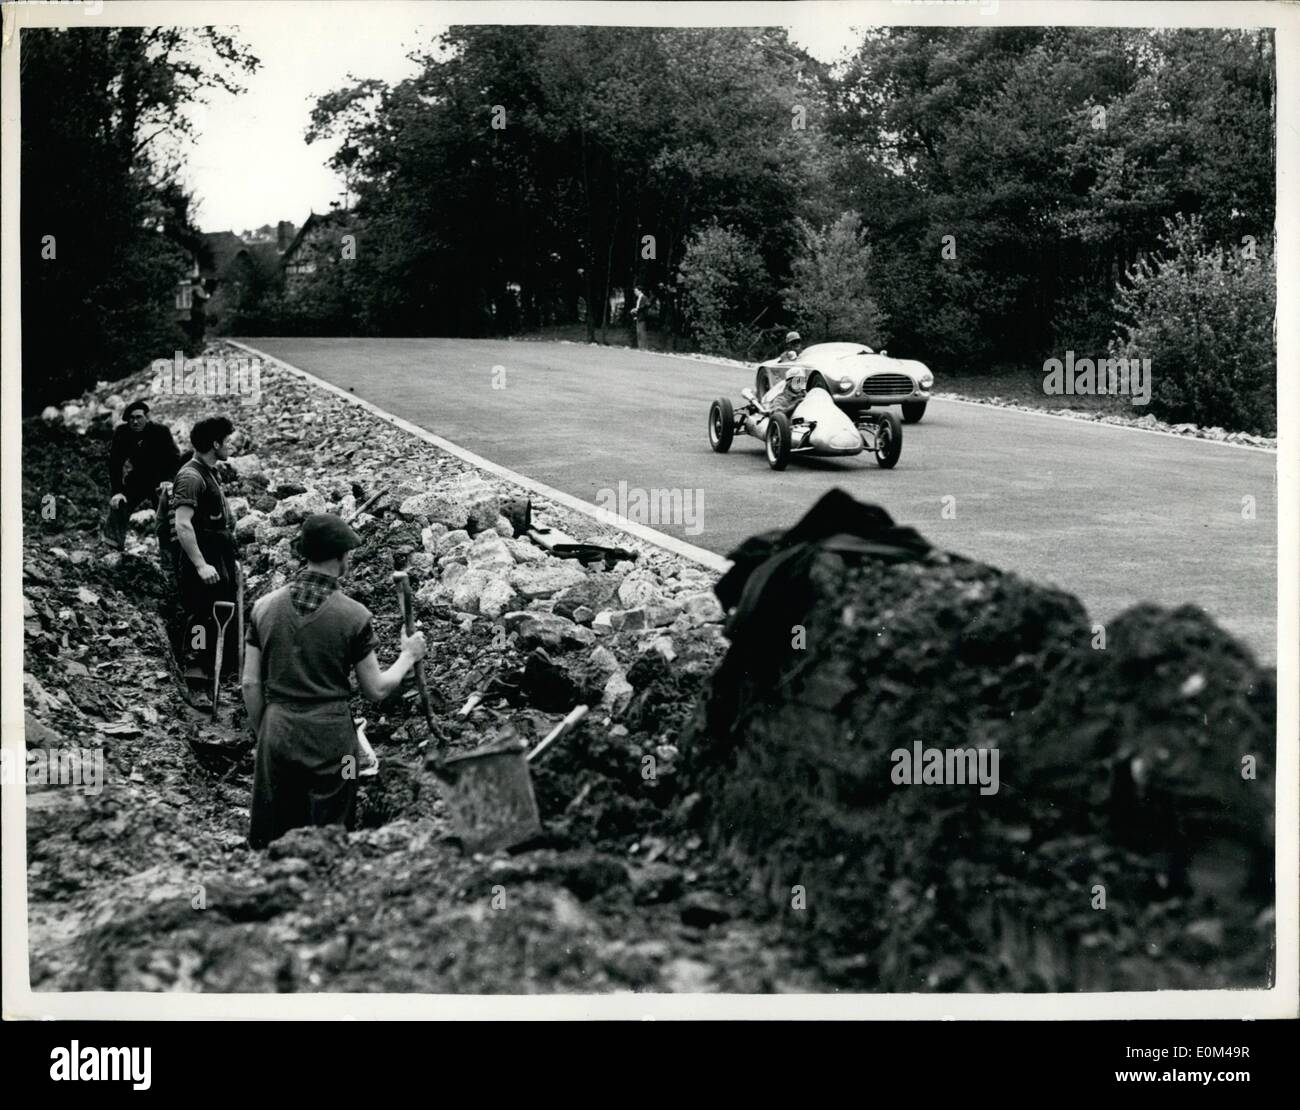 May 05, 1953 - Motor Racing Practice At Crystal Palace: Arrangements are going a head at the Crystal Palace motor racing track preparation for the first meeting on Whit Monday, May 25th, which is being organised by the British Automobiles Racing Club. The construction of the new link section of the track to exclude the inner loop is now completed. Several racing cars were at speed today, testing the new circuit. Photo Shows Racing cars seen at speed on the new circuit, as workmen pauz in their test of working on the side of the track. Stock Photo